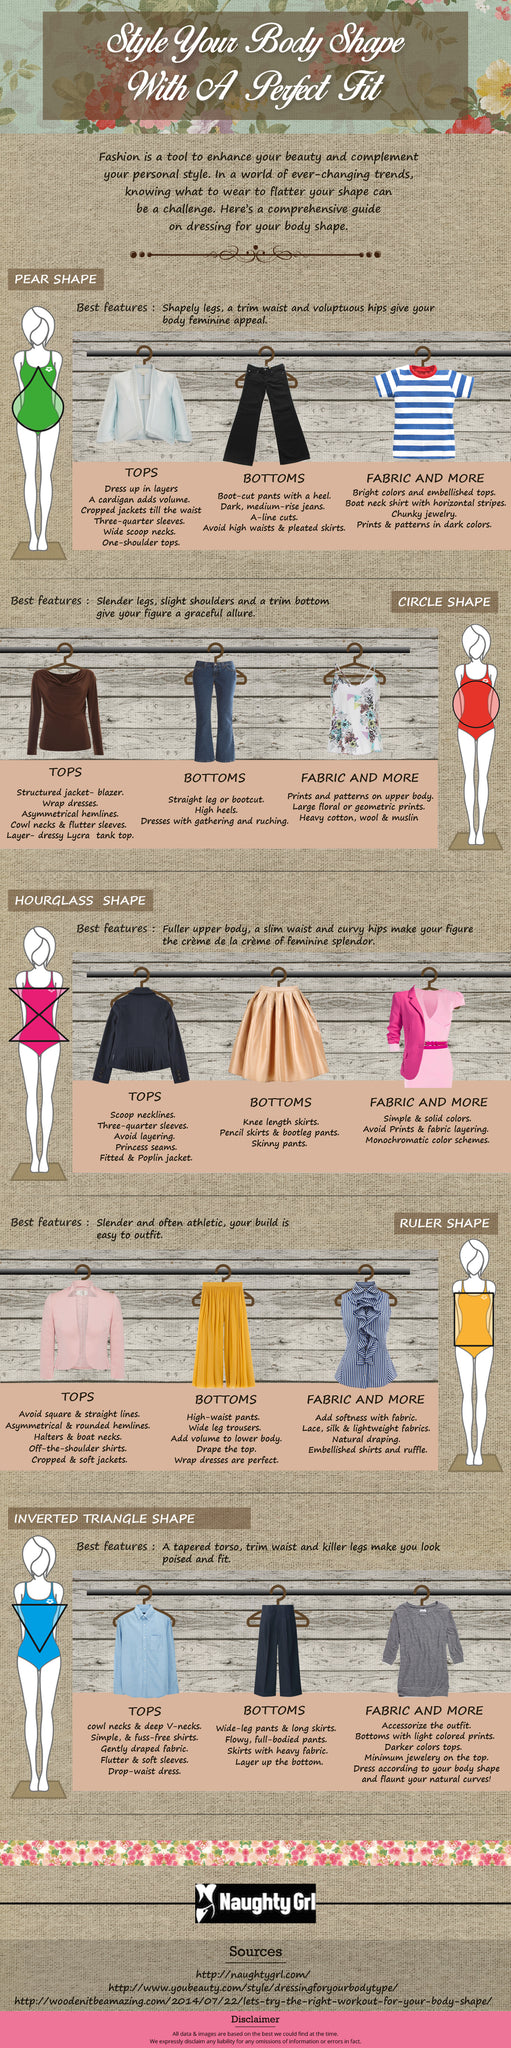 GUIDE: HOW TO DRESS TO YOUR BODY SHAPE!